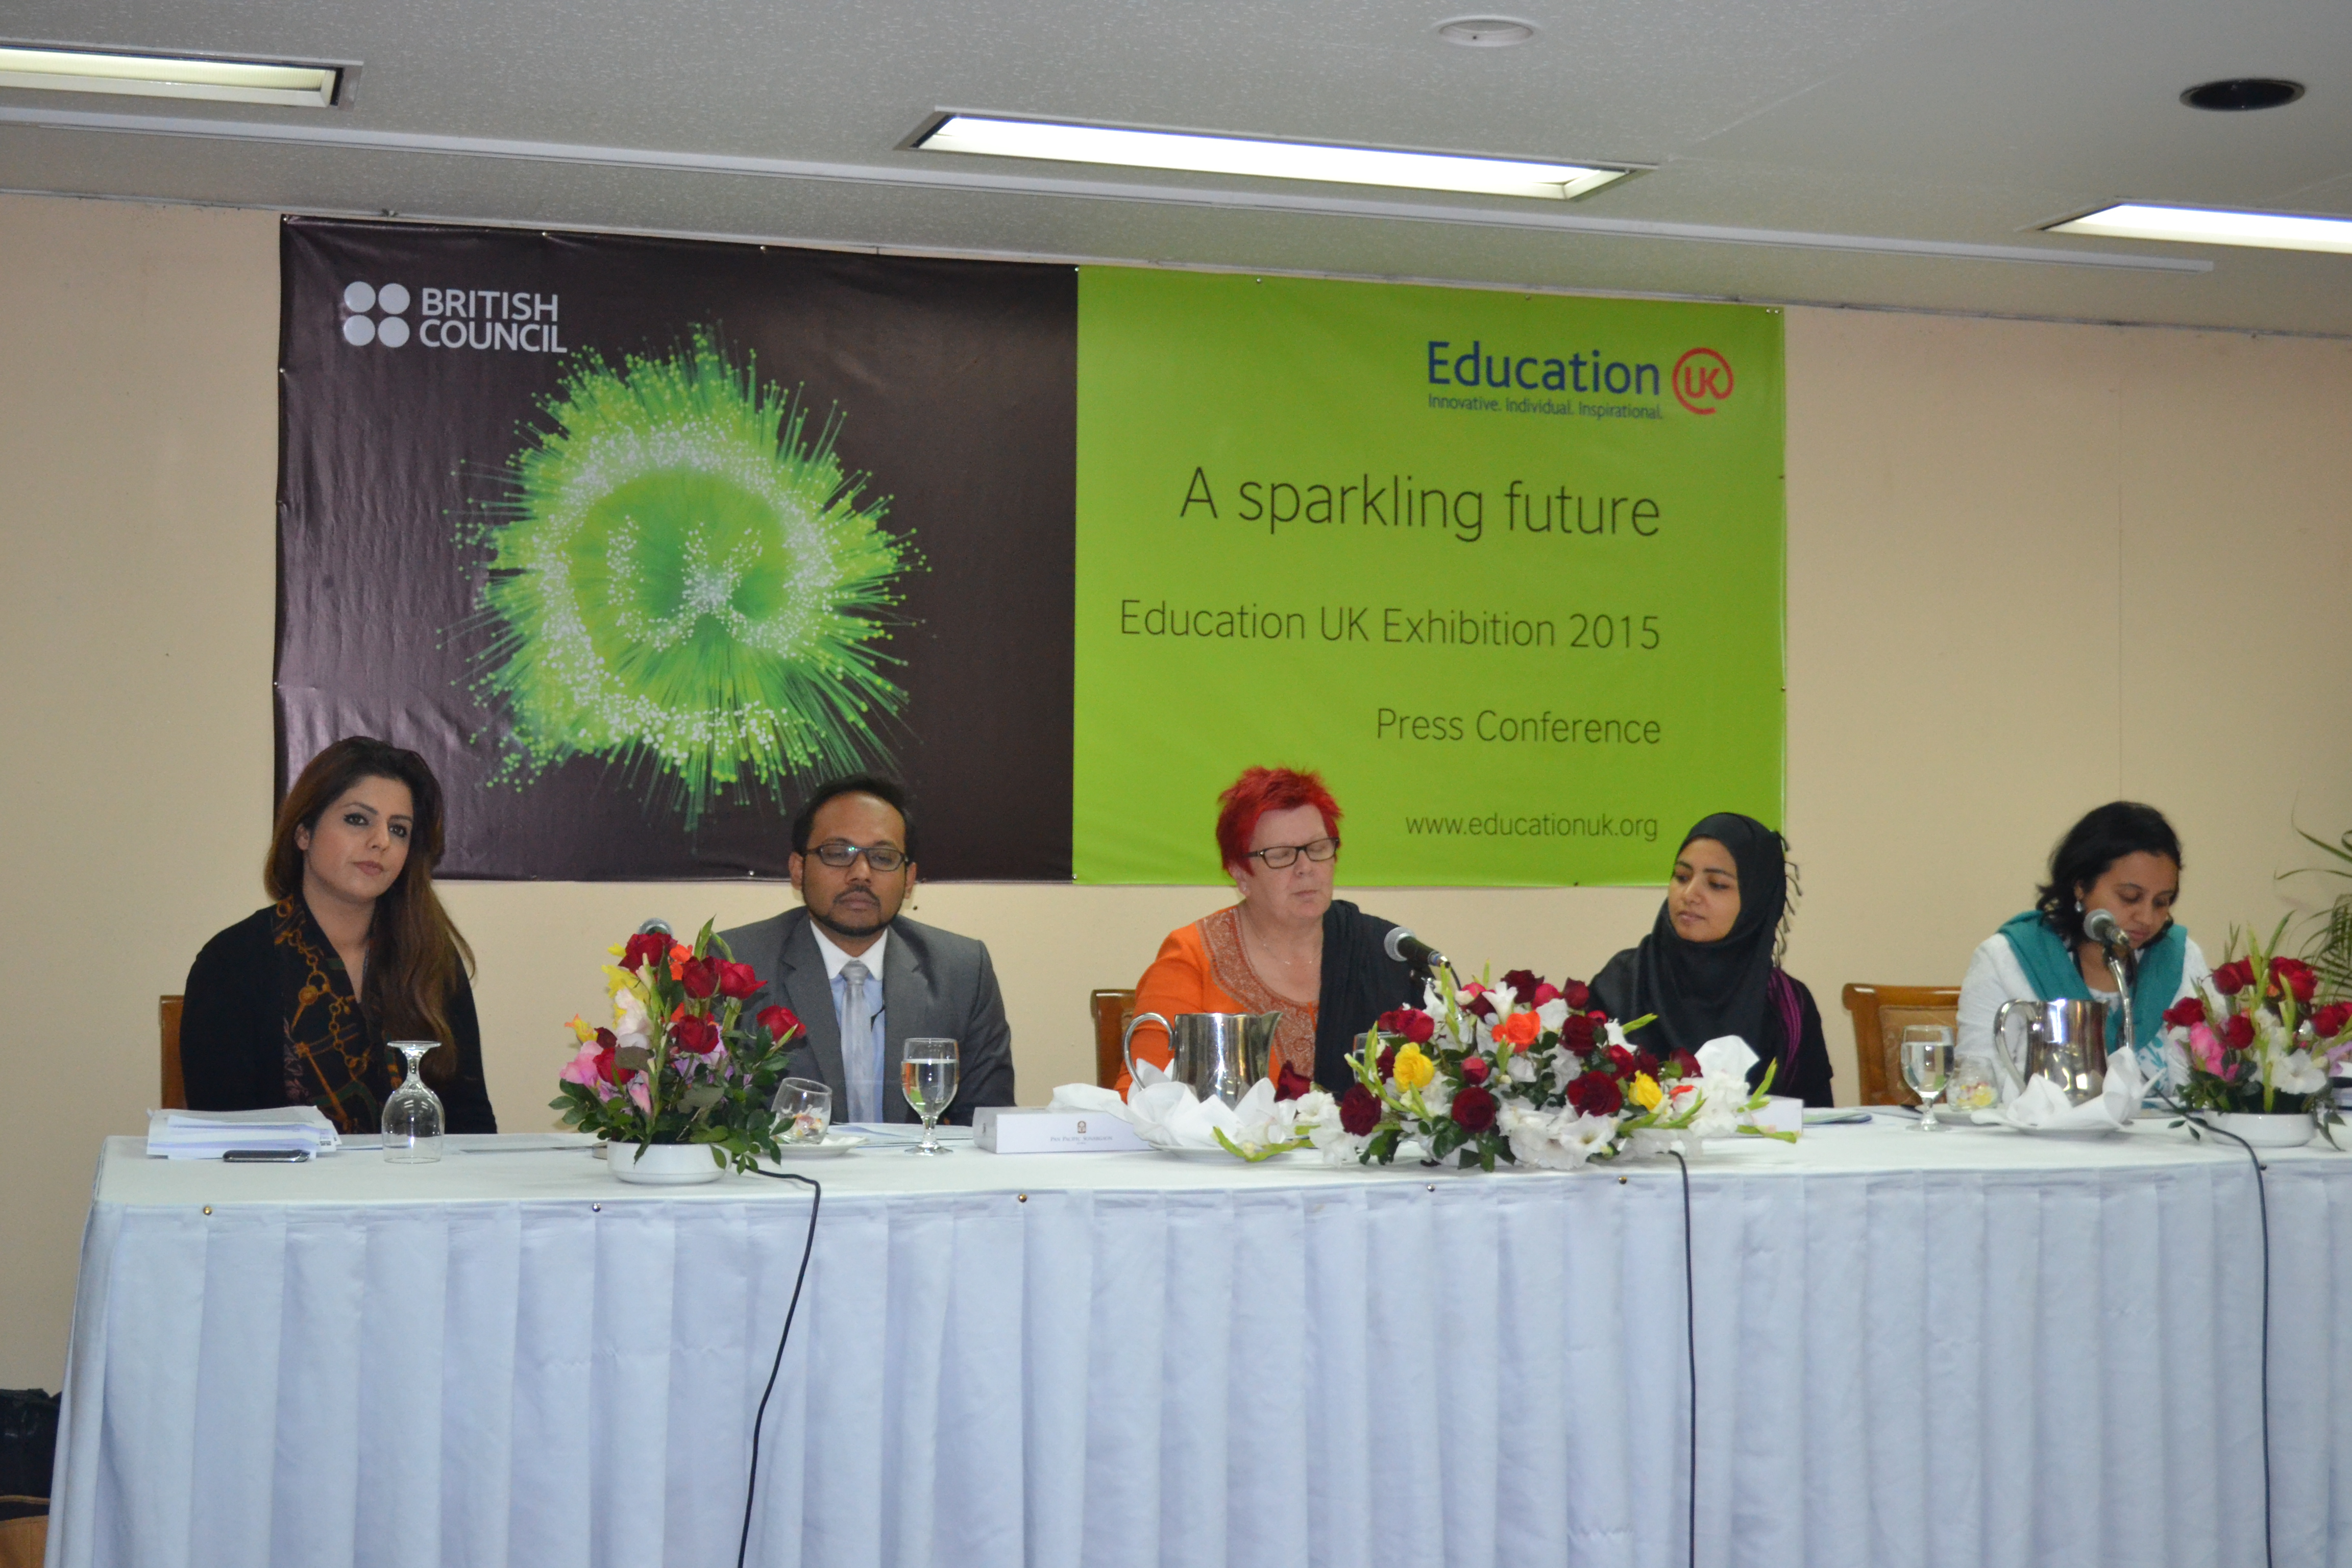 Education UK Exhibition 2015 Press Conference in Bangladesh